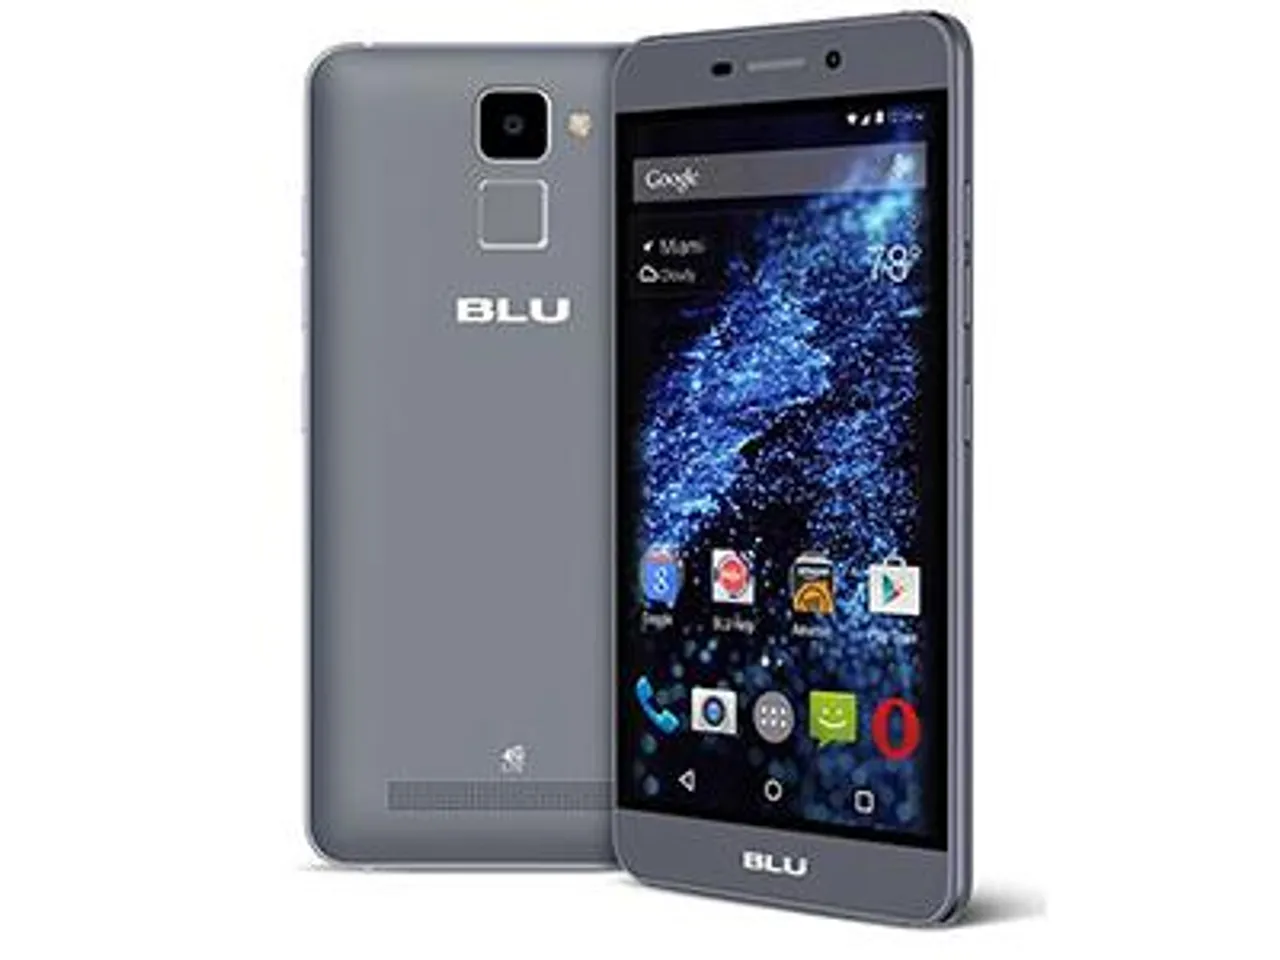 Blu launches Life Mark smartphone, priced at Rs 8,999